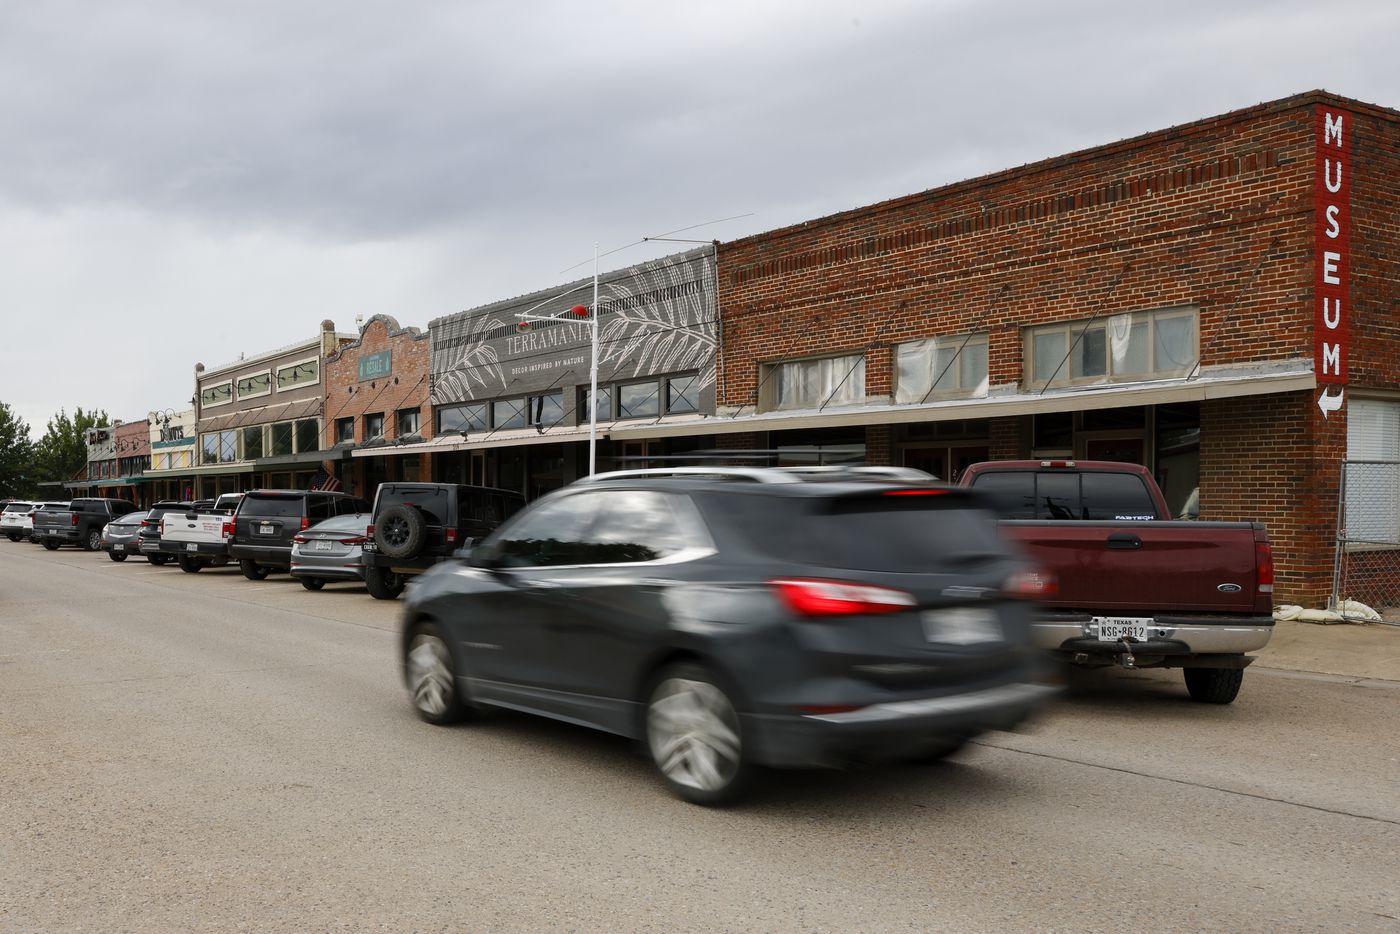 Cars drive along Pecan Street near the town square in Celina on Aug. 23.